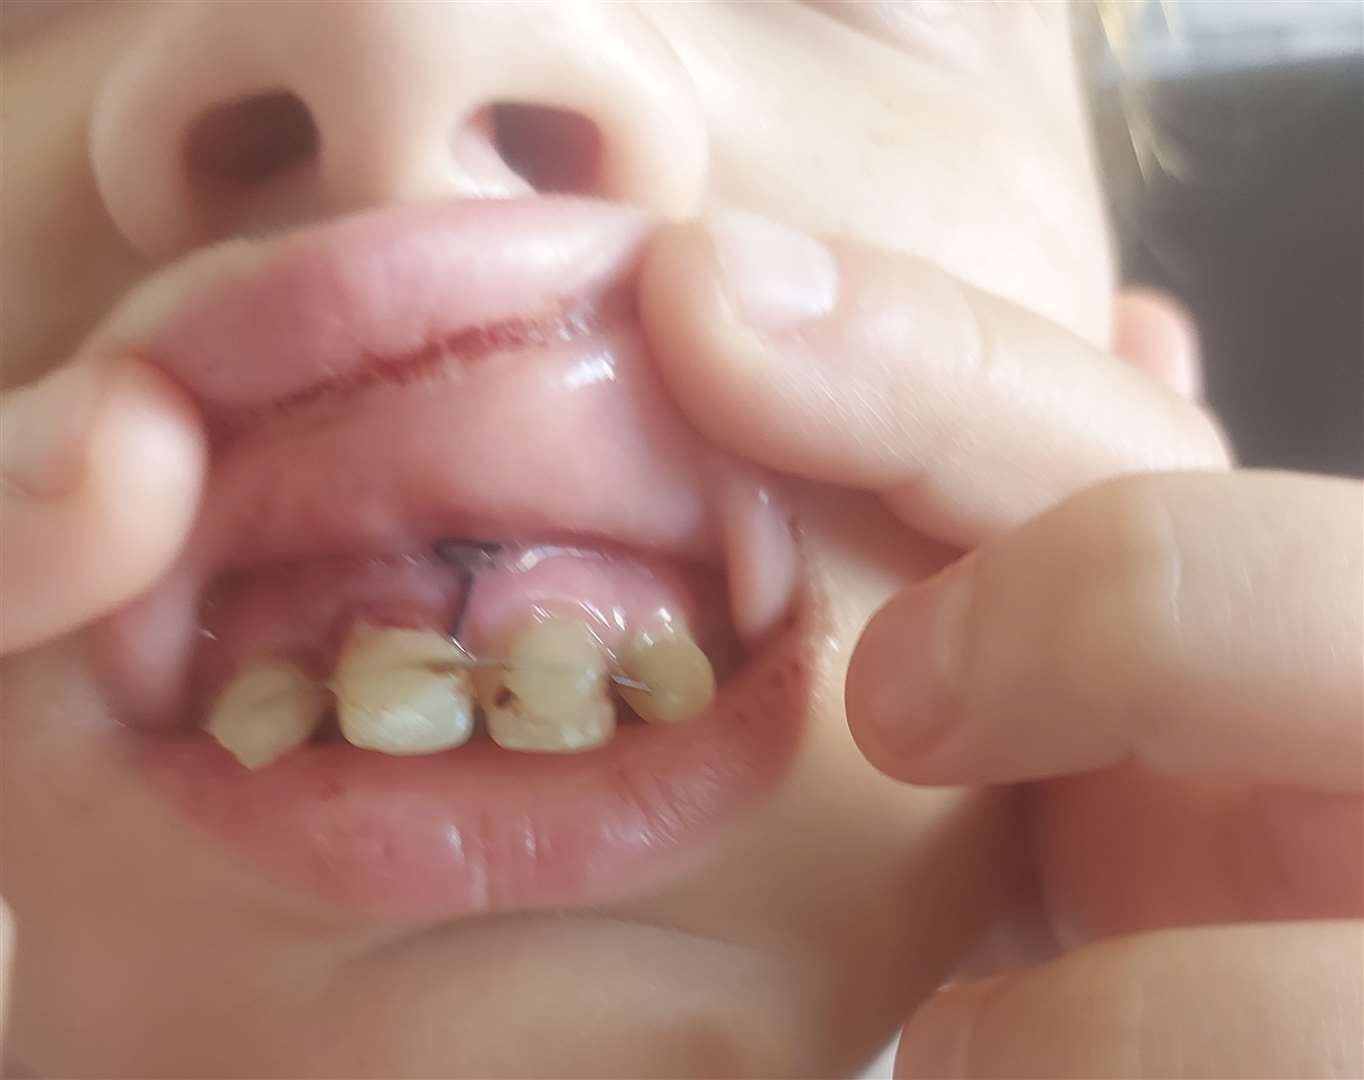 Denis-Cristian Bulancea, 12, with his tooth in place after pulling it out on a children's castle slide in Beachfields, Sheerness